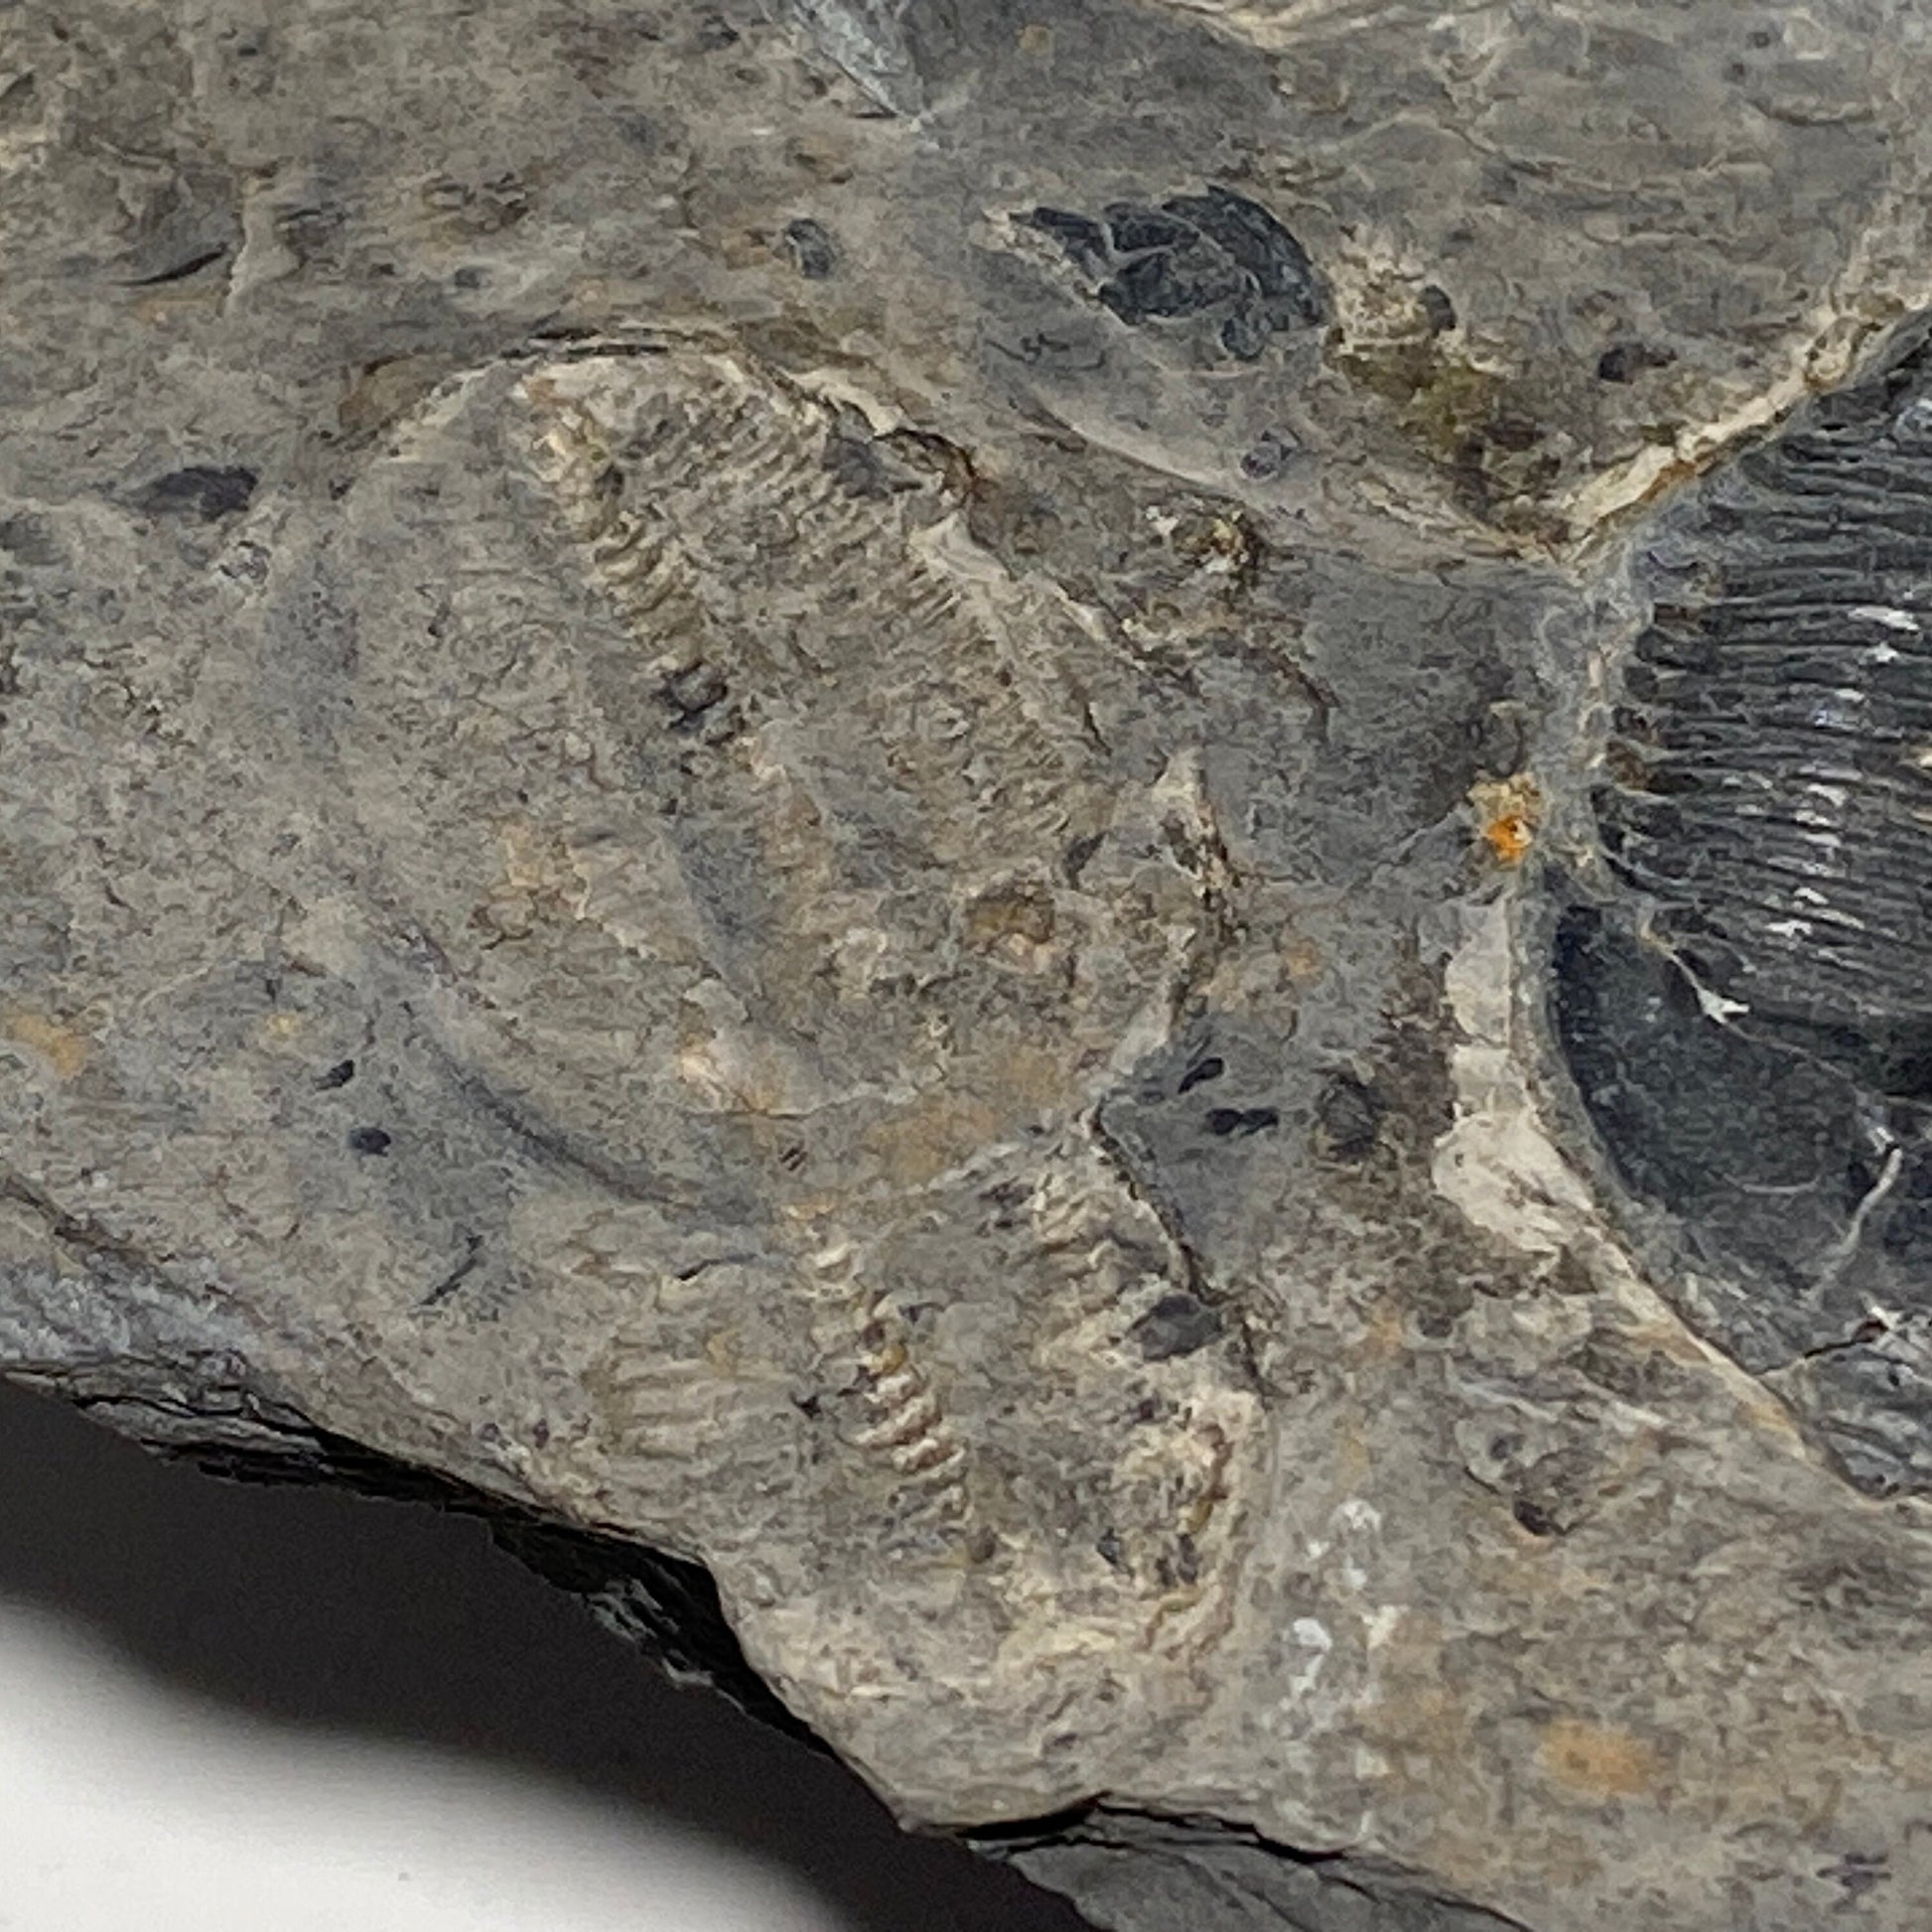 Trilobite fossils in Utah shale | fossil decor, Utah fossil, fossil collectible, trilobite specimen, Elrathia King, fossil lover gift